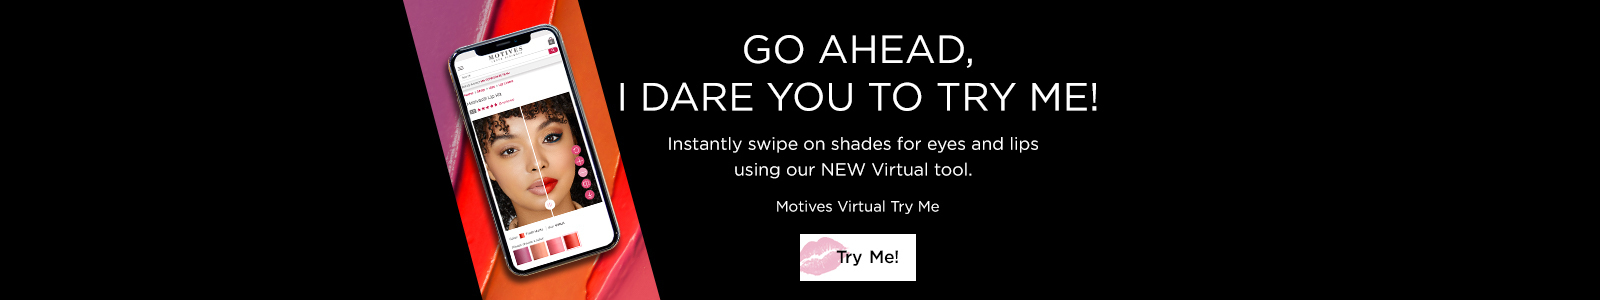 Go Ahead, I dare you to try me! Instantly swipe on shade for eyes and lips using out NEW virtual tool. Motives Virtual Try Me. Try Me!